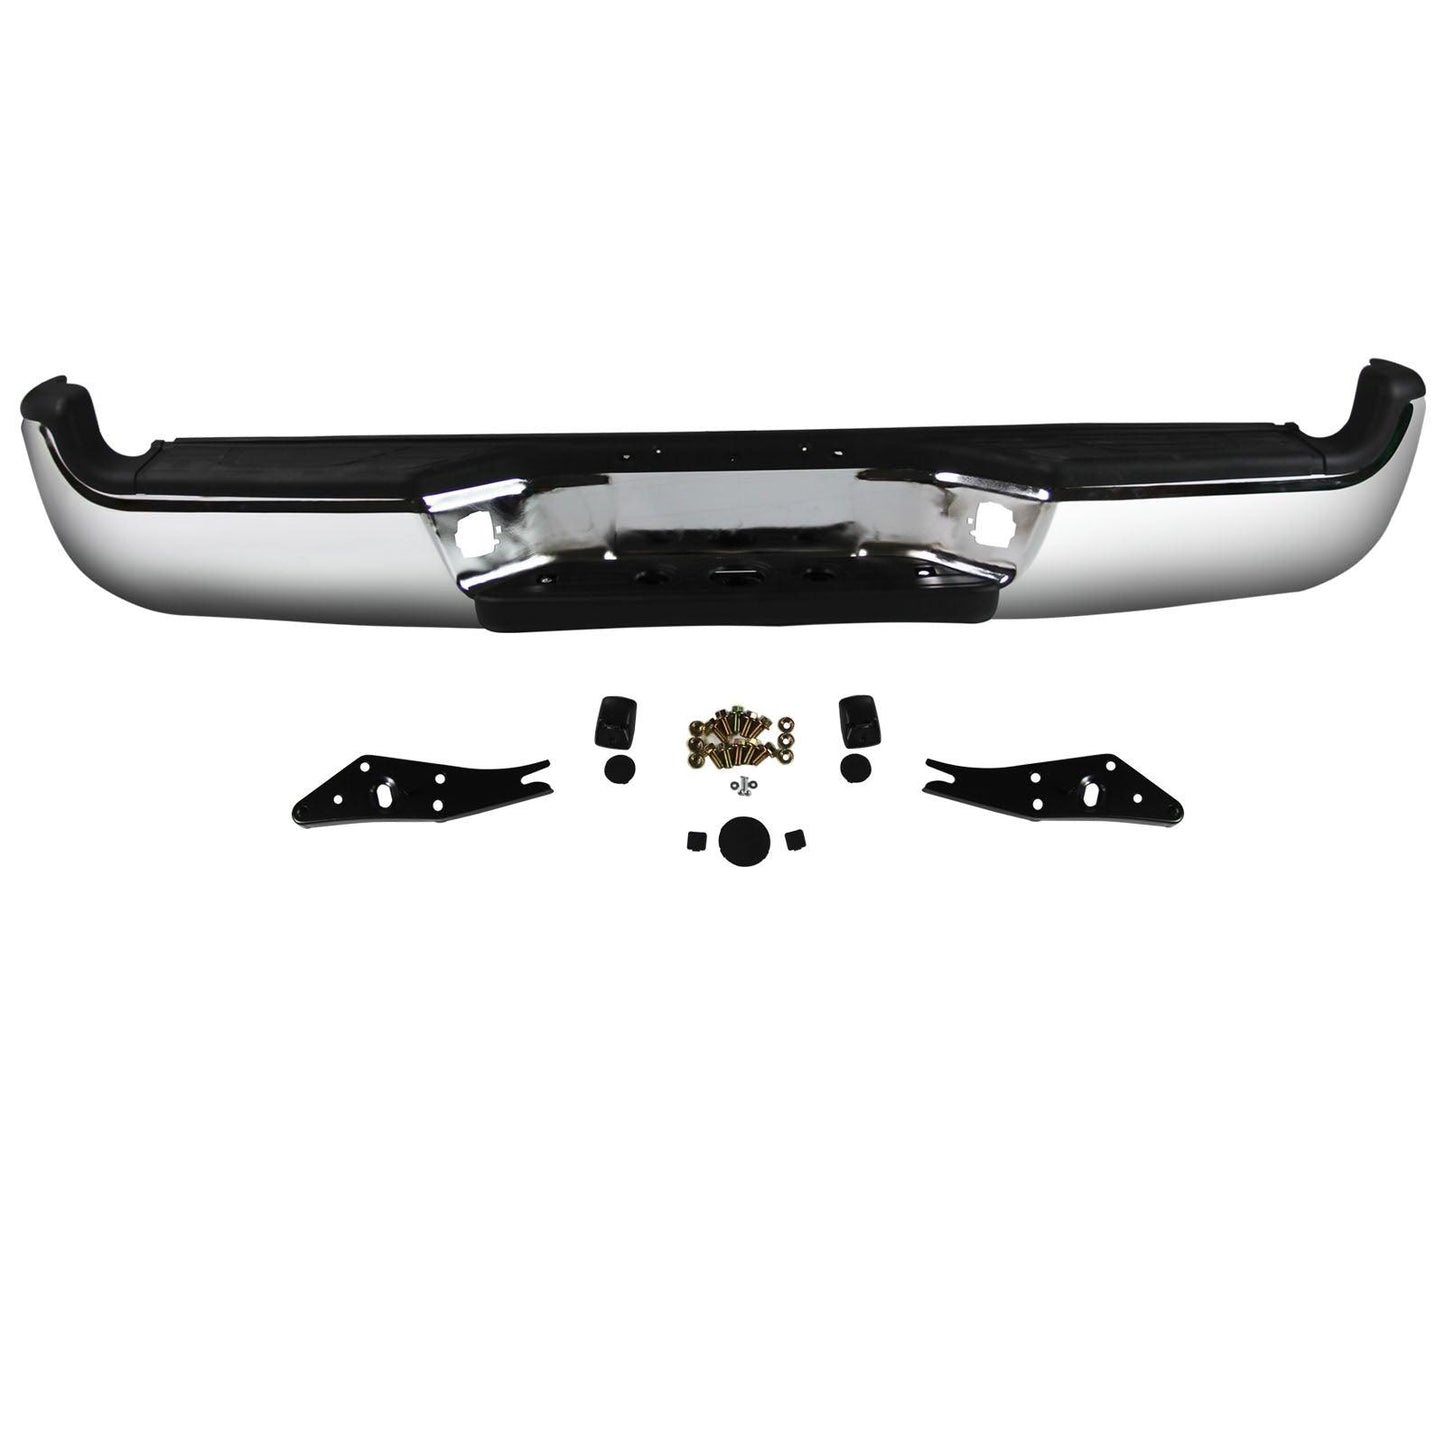 NEW Steel - Complete Chrome Rear Bumper Assembly For 2005-2015 Tacoma 05-15 SR5 (Fits: Tacoma) - Goodmatchup